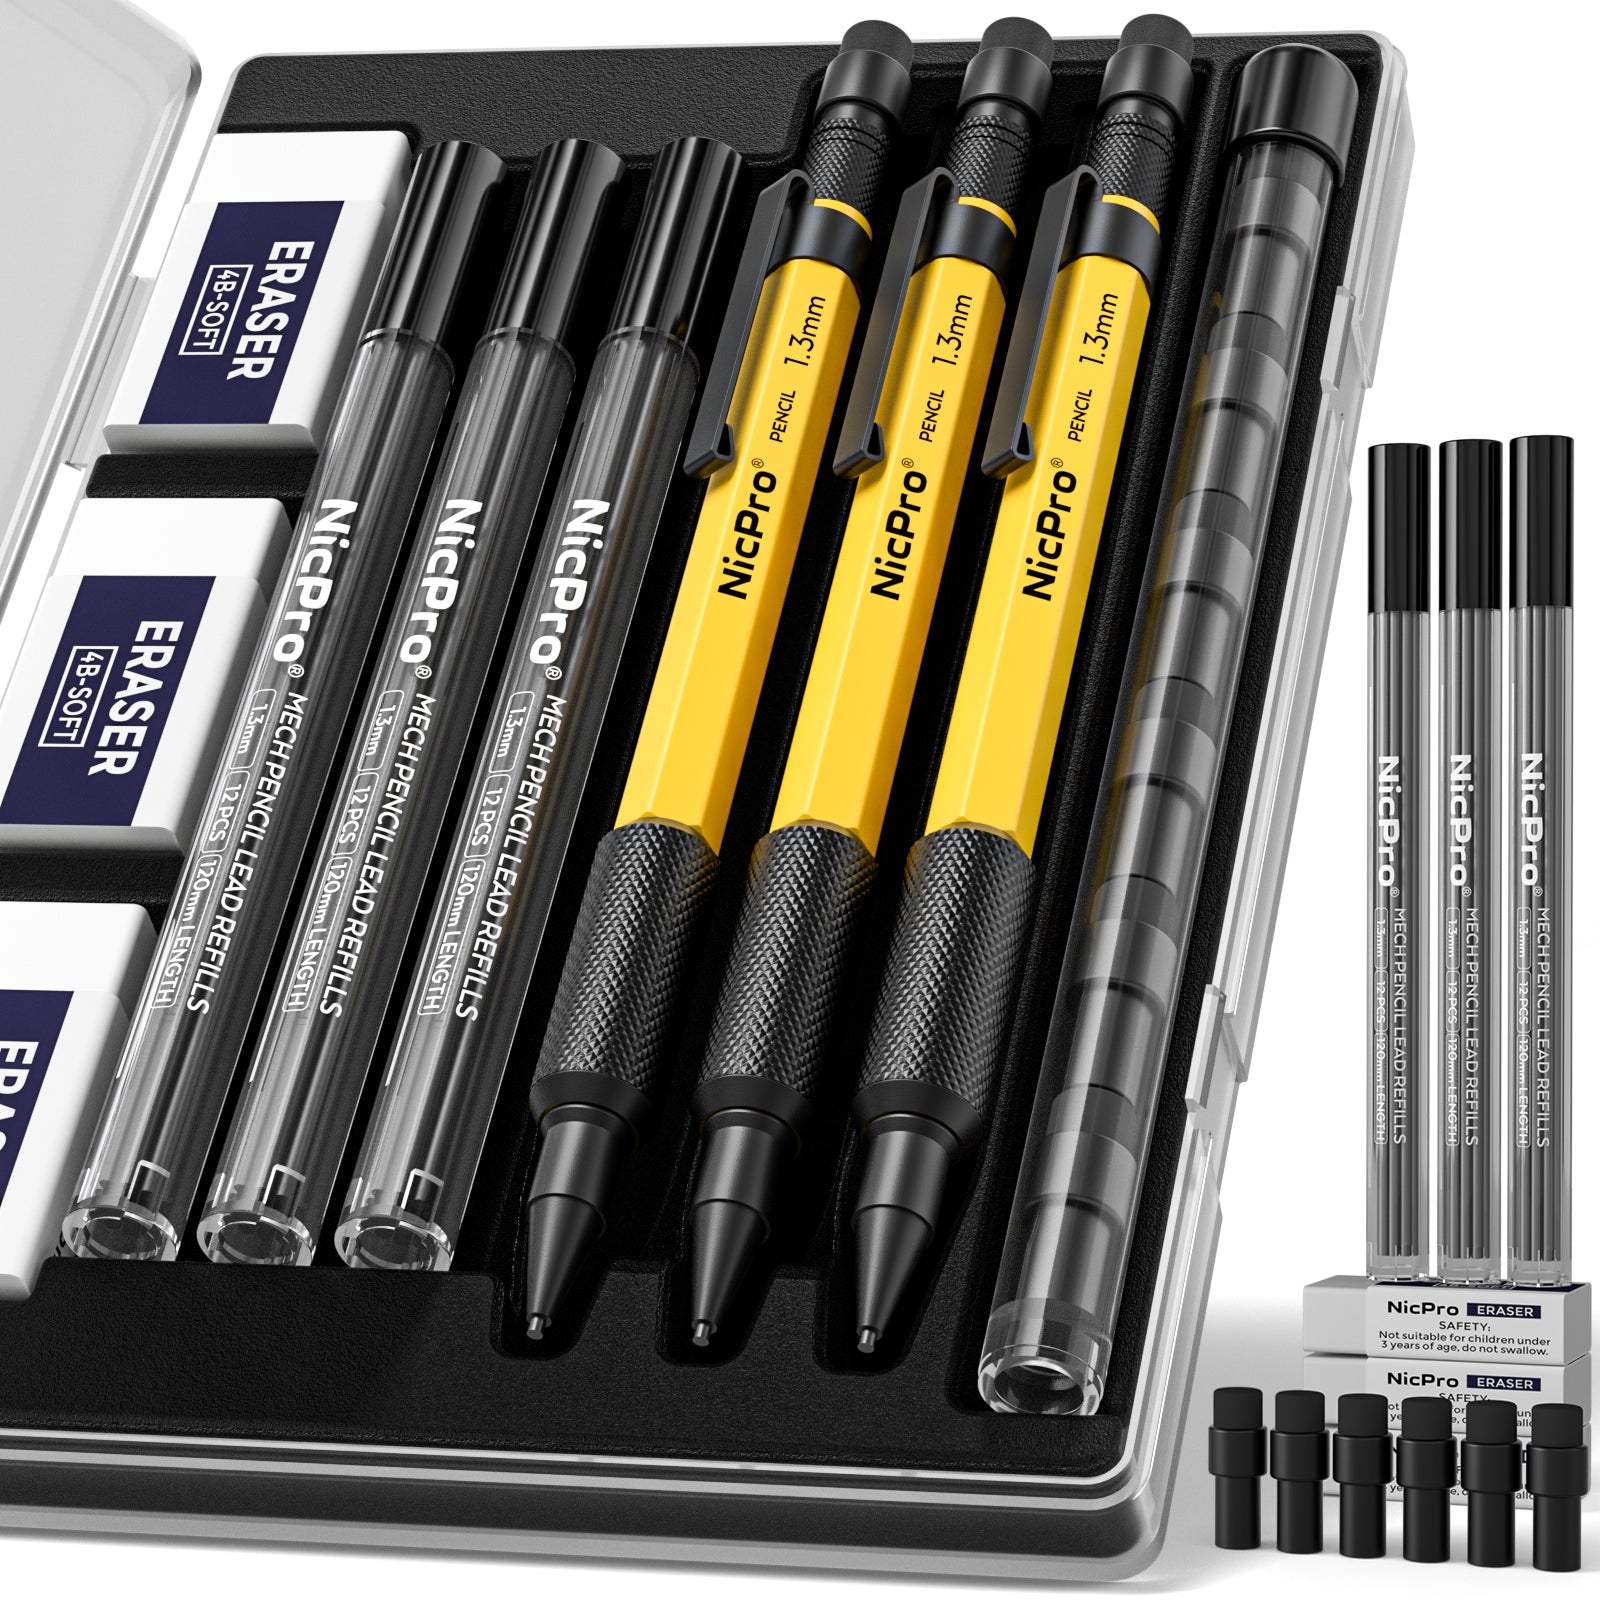  Mr. Pen- Mechanical Pencil Set with Leads and Eraser Refills,  5 Sizes - 0.3, 0.5, 0.7, 0.9 and 2 Millimeters, for Drafting, Drawing and  Sketching : Office Products